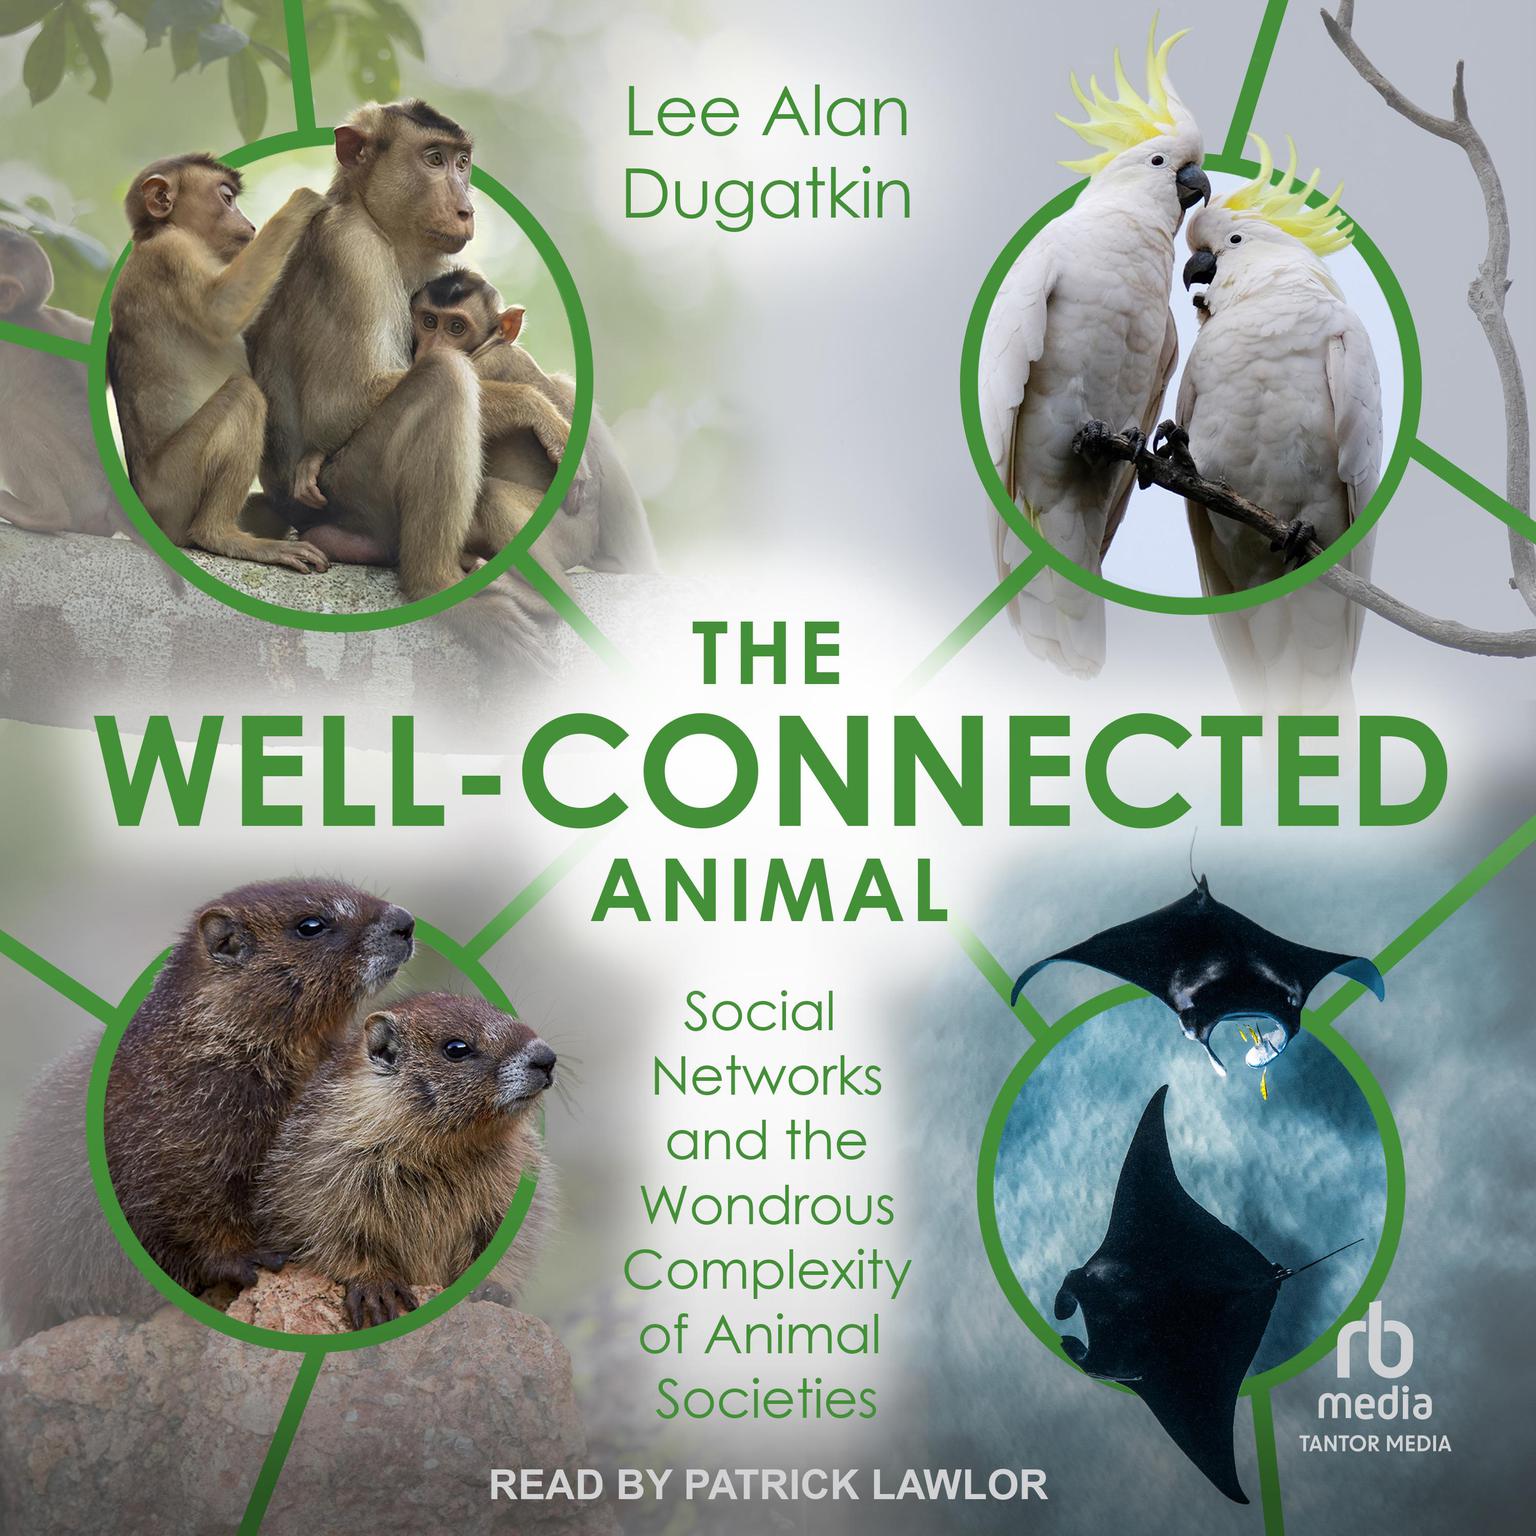 The Well-Connected Animal: Social Networks and the Wondrous Complexity of Animal Societies Audiobook, by Lee Alan Dugatkin